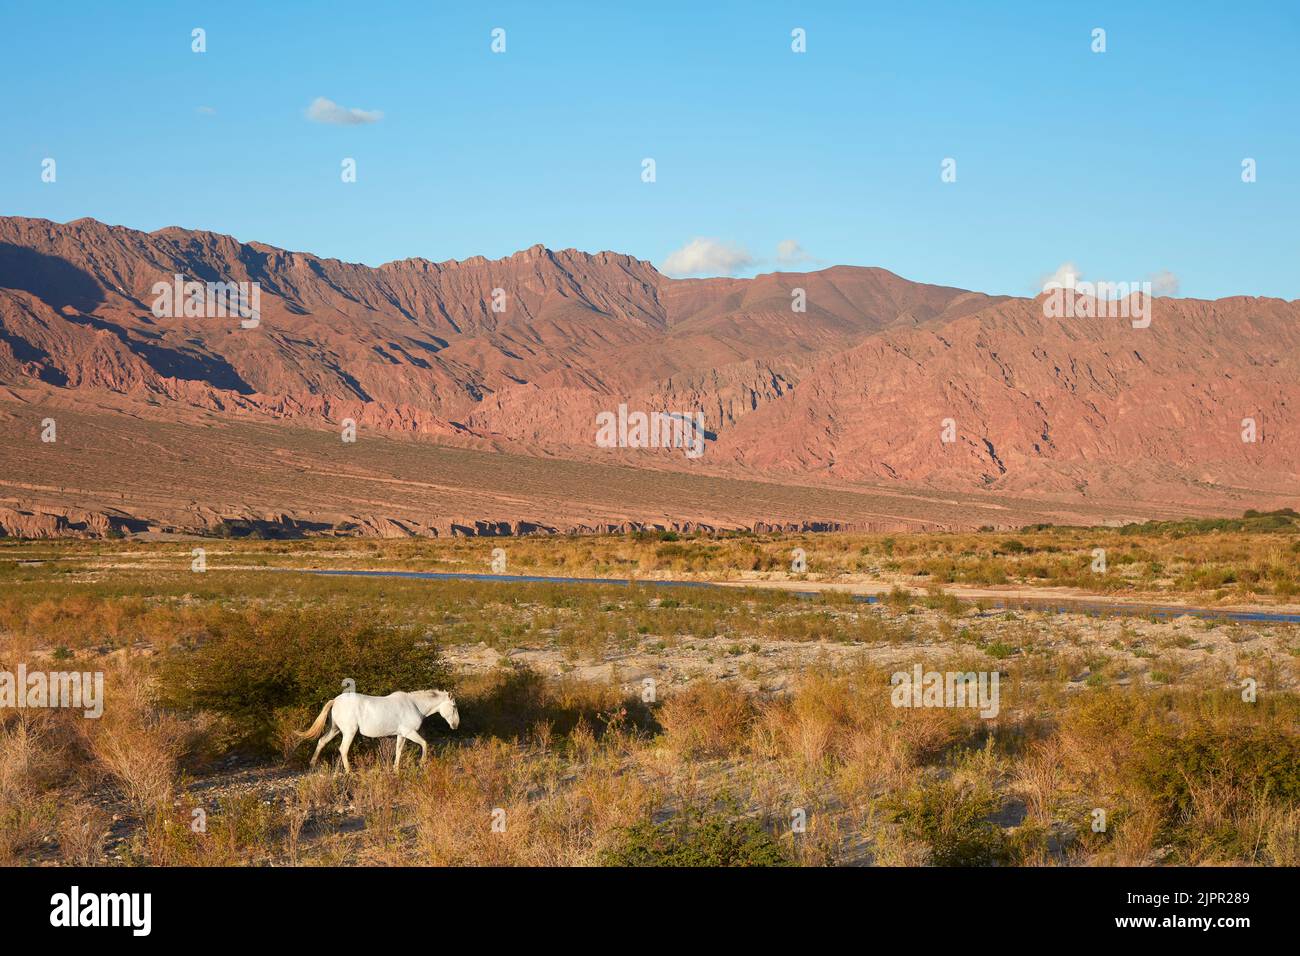 A white wild horse in the Calchaqui Valley at sunset, Salta province, Argentina. Stock Photo